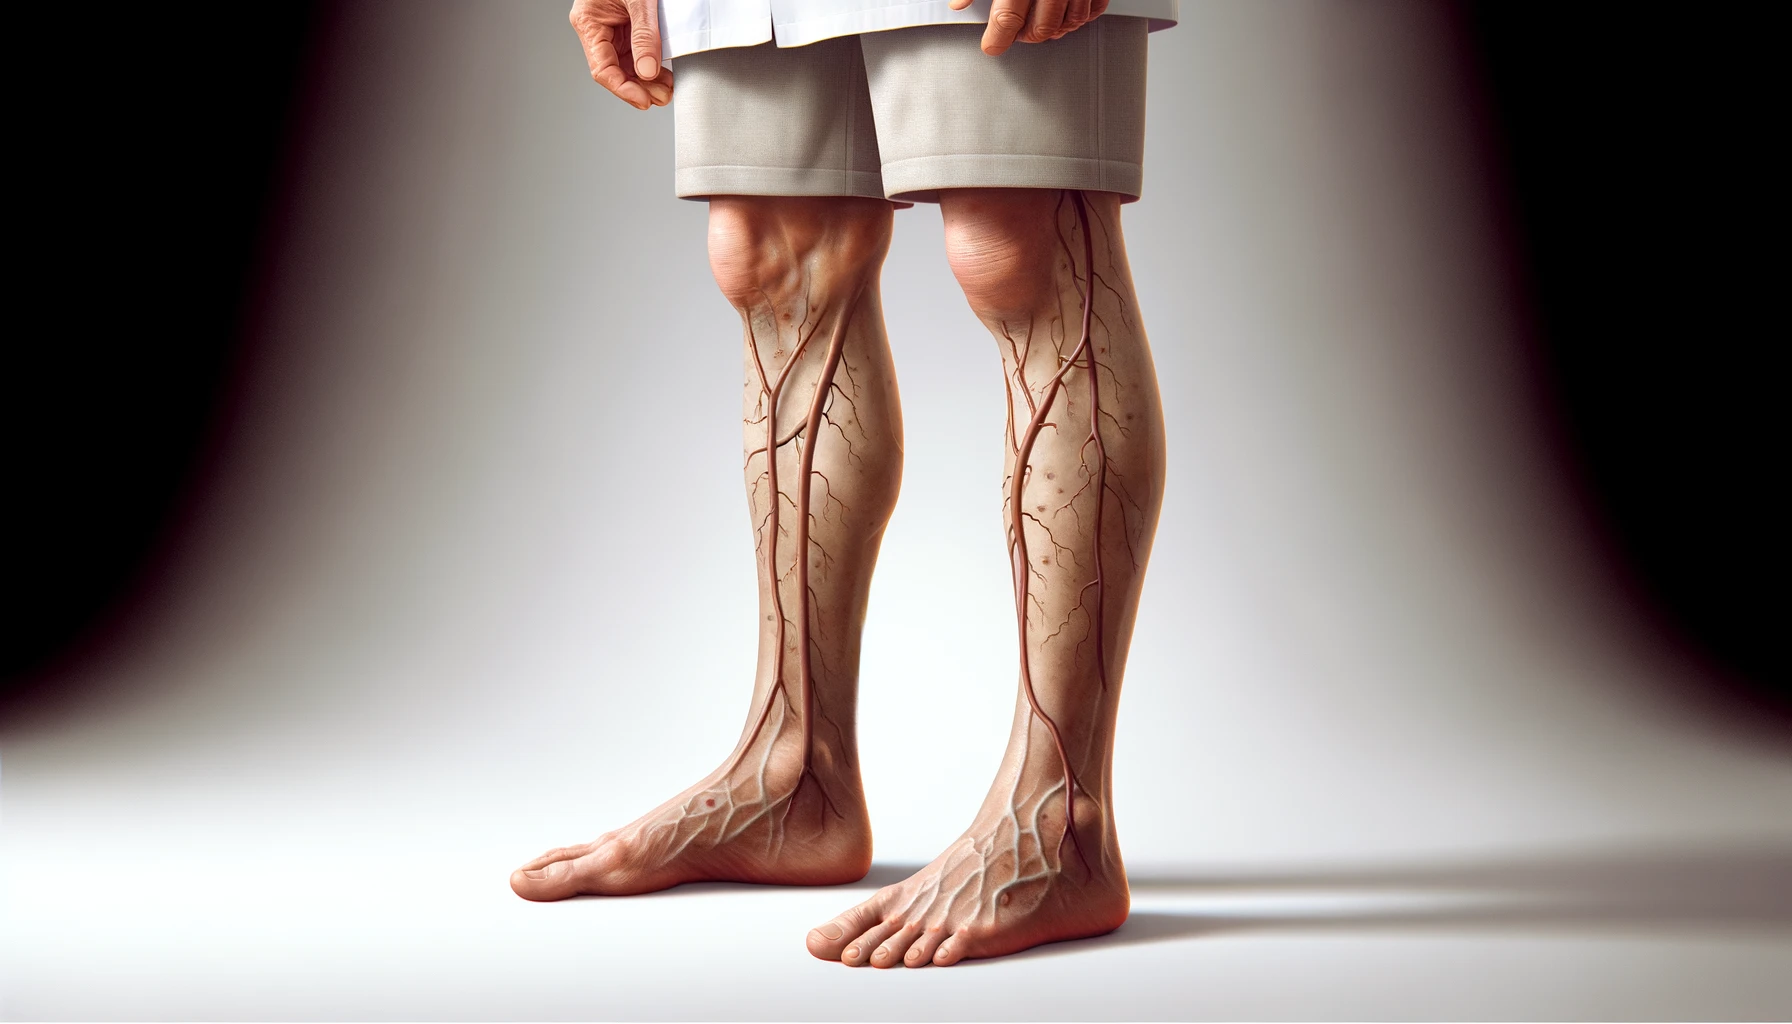 Taking Control of Chronic Venous Insufficiency: Treatment Options and Lifestyle Changes